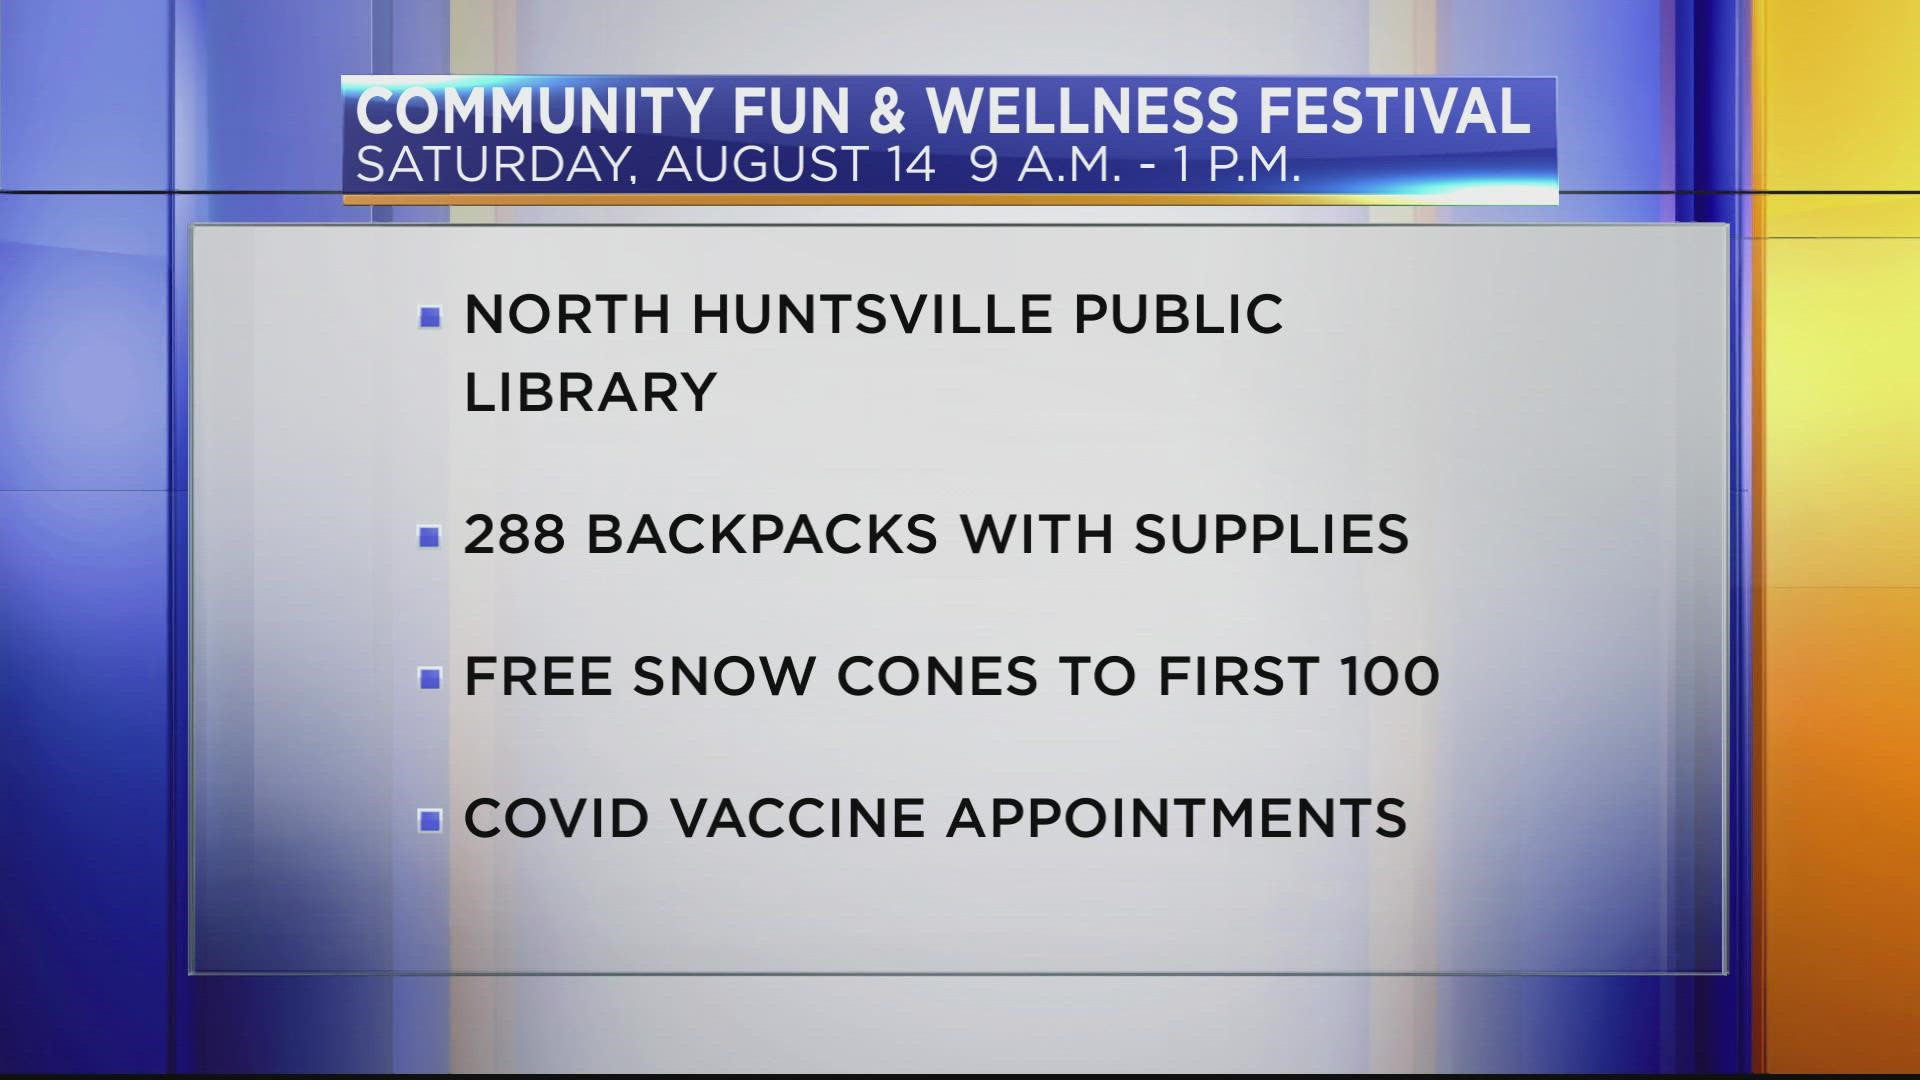 The festival is Saturday, August 14 at the North Huntsville Public Library, 9 a.m. - 1 p.m.